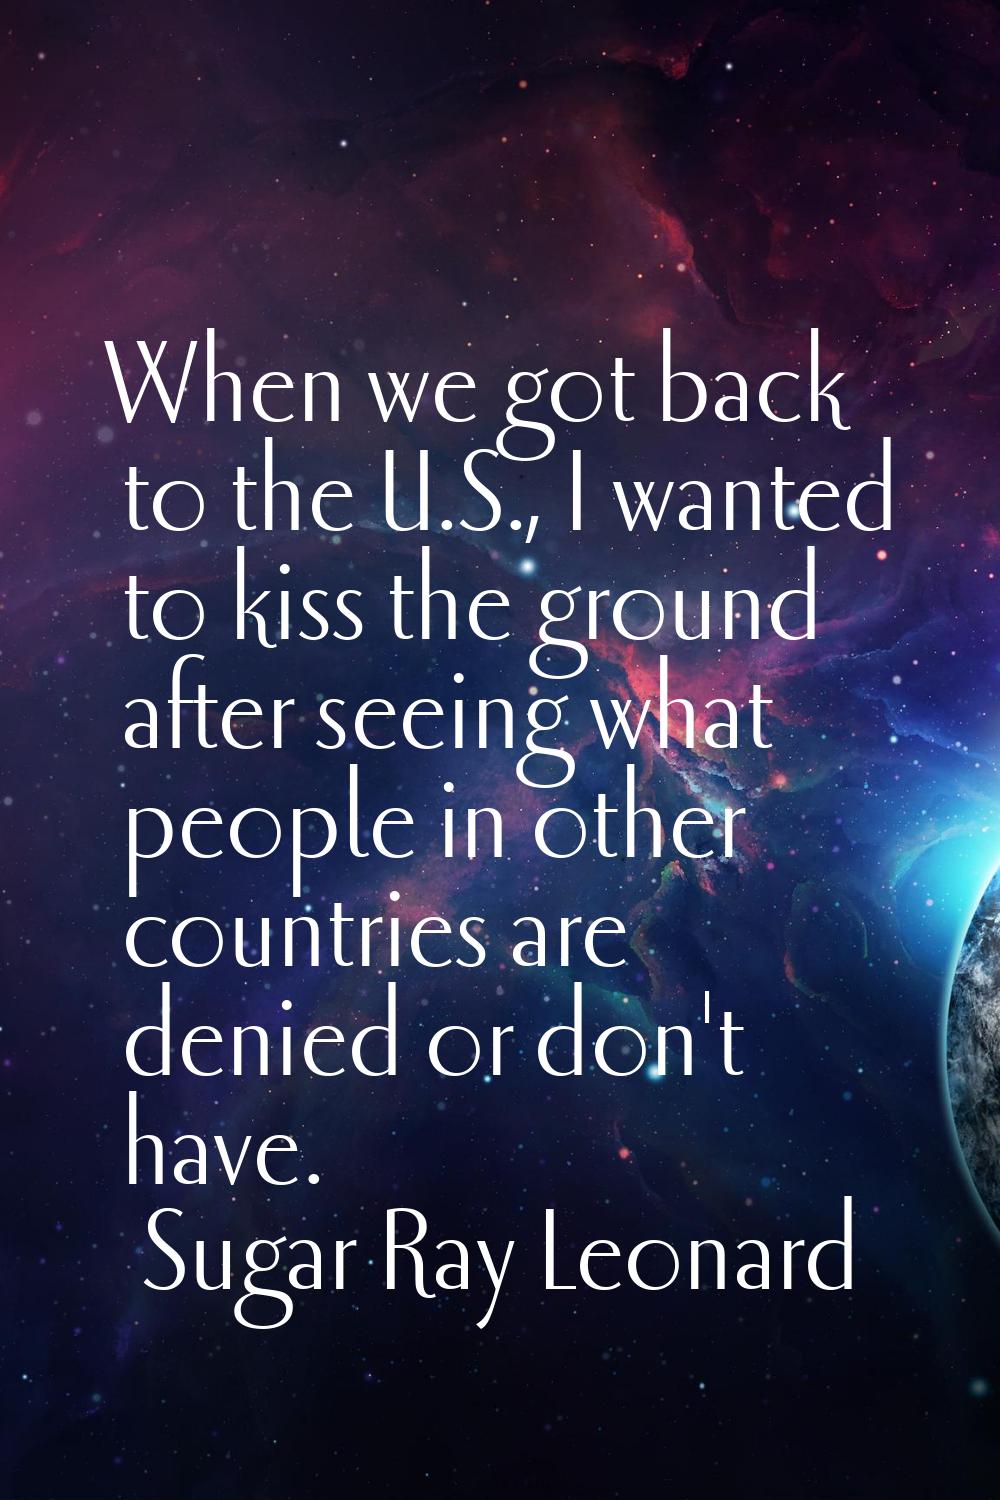 When we got back to the U.S., I wanted to kiss the ground after seeing what people in other countri